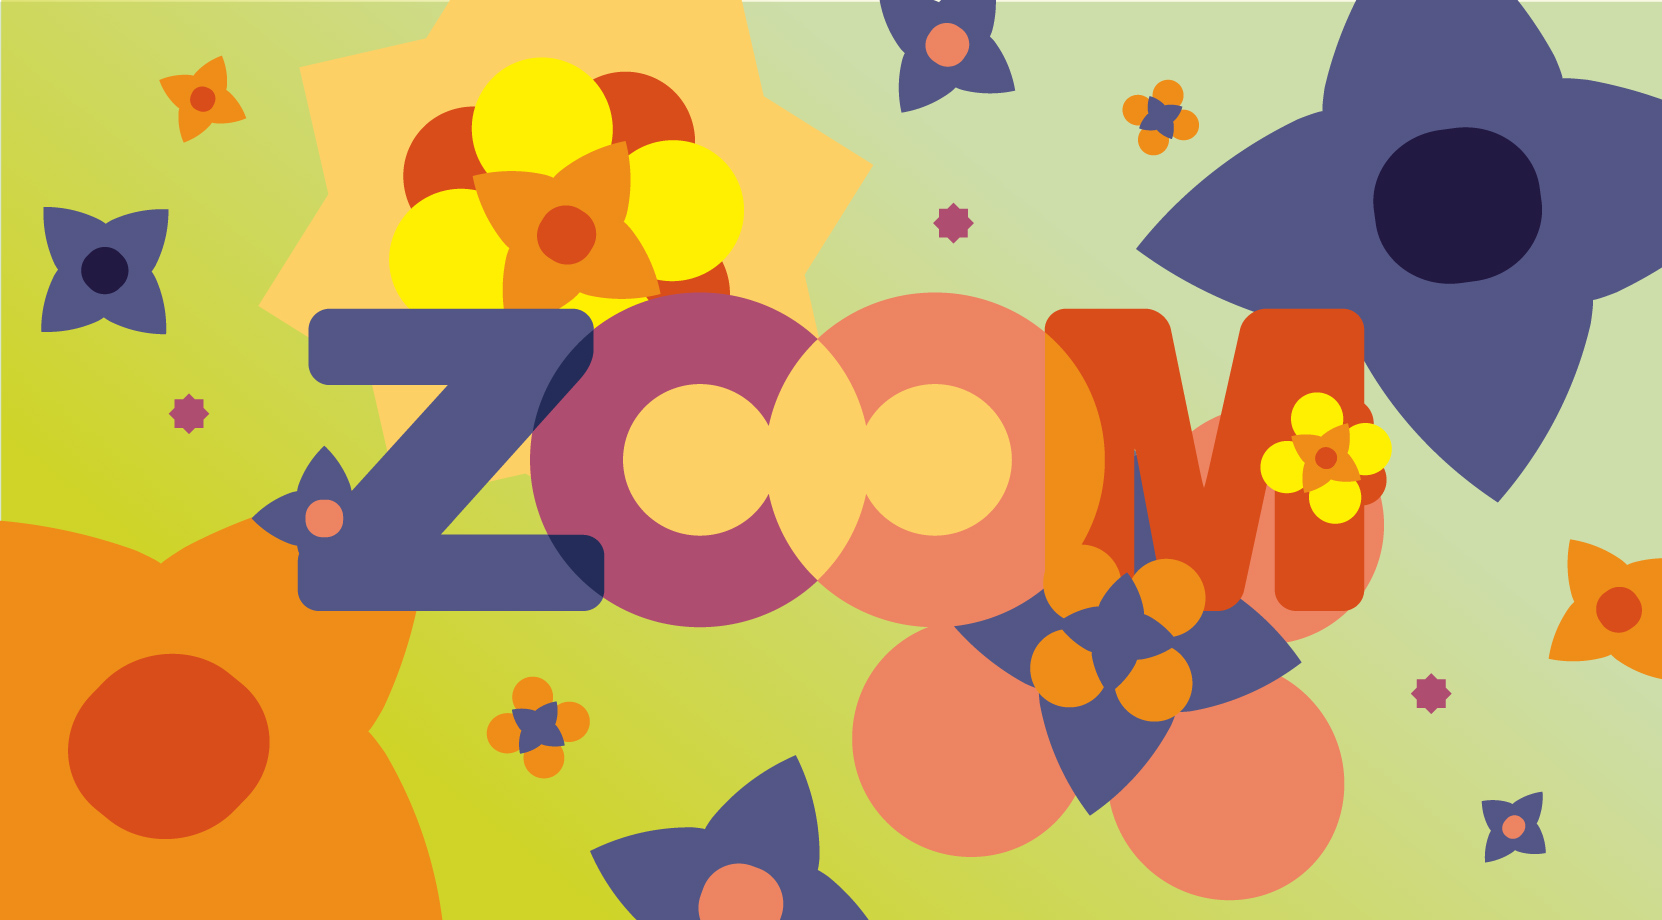 The image says the word ZOOM and is covered in colorful bursts of flowers.